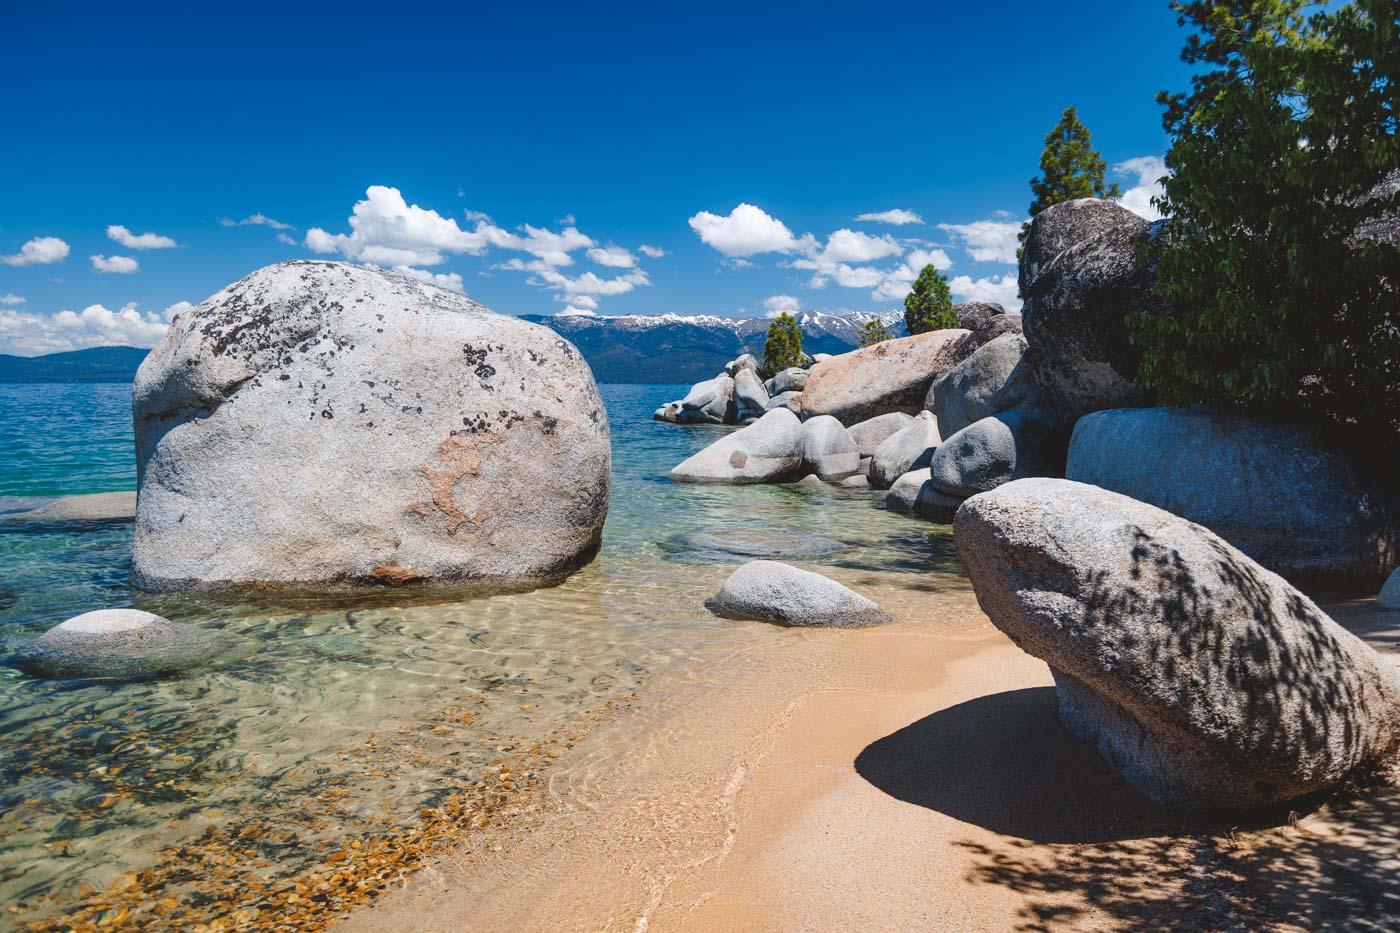 A view from standing on Whale Beach with smooth, round rocks on the beach and in Lake Tahoe on a sunny day.